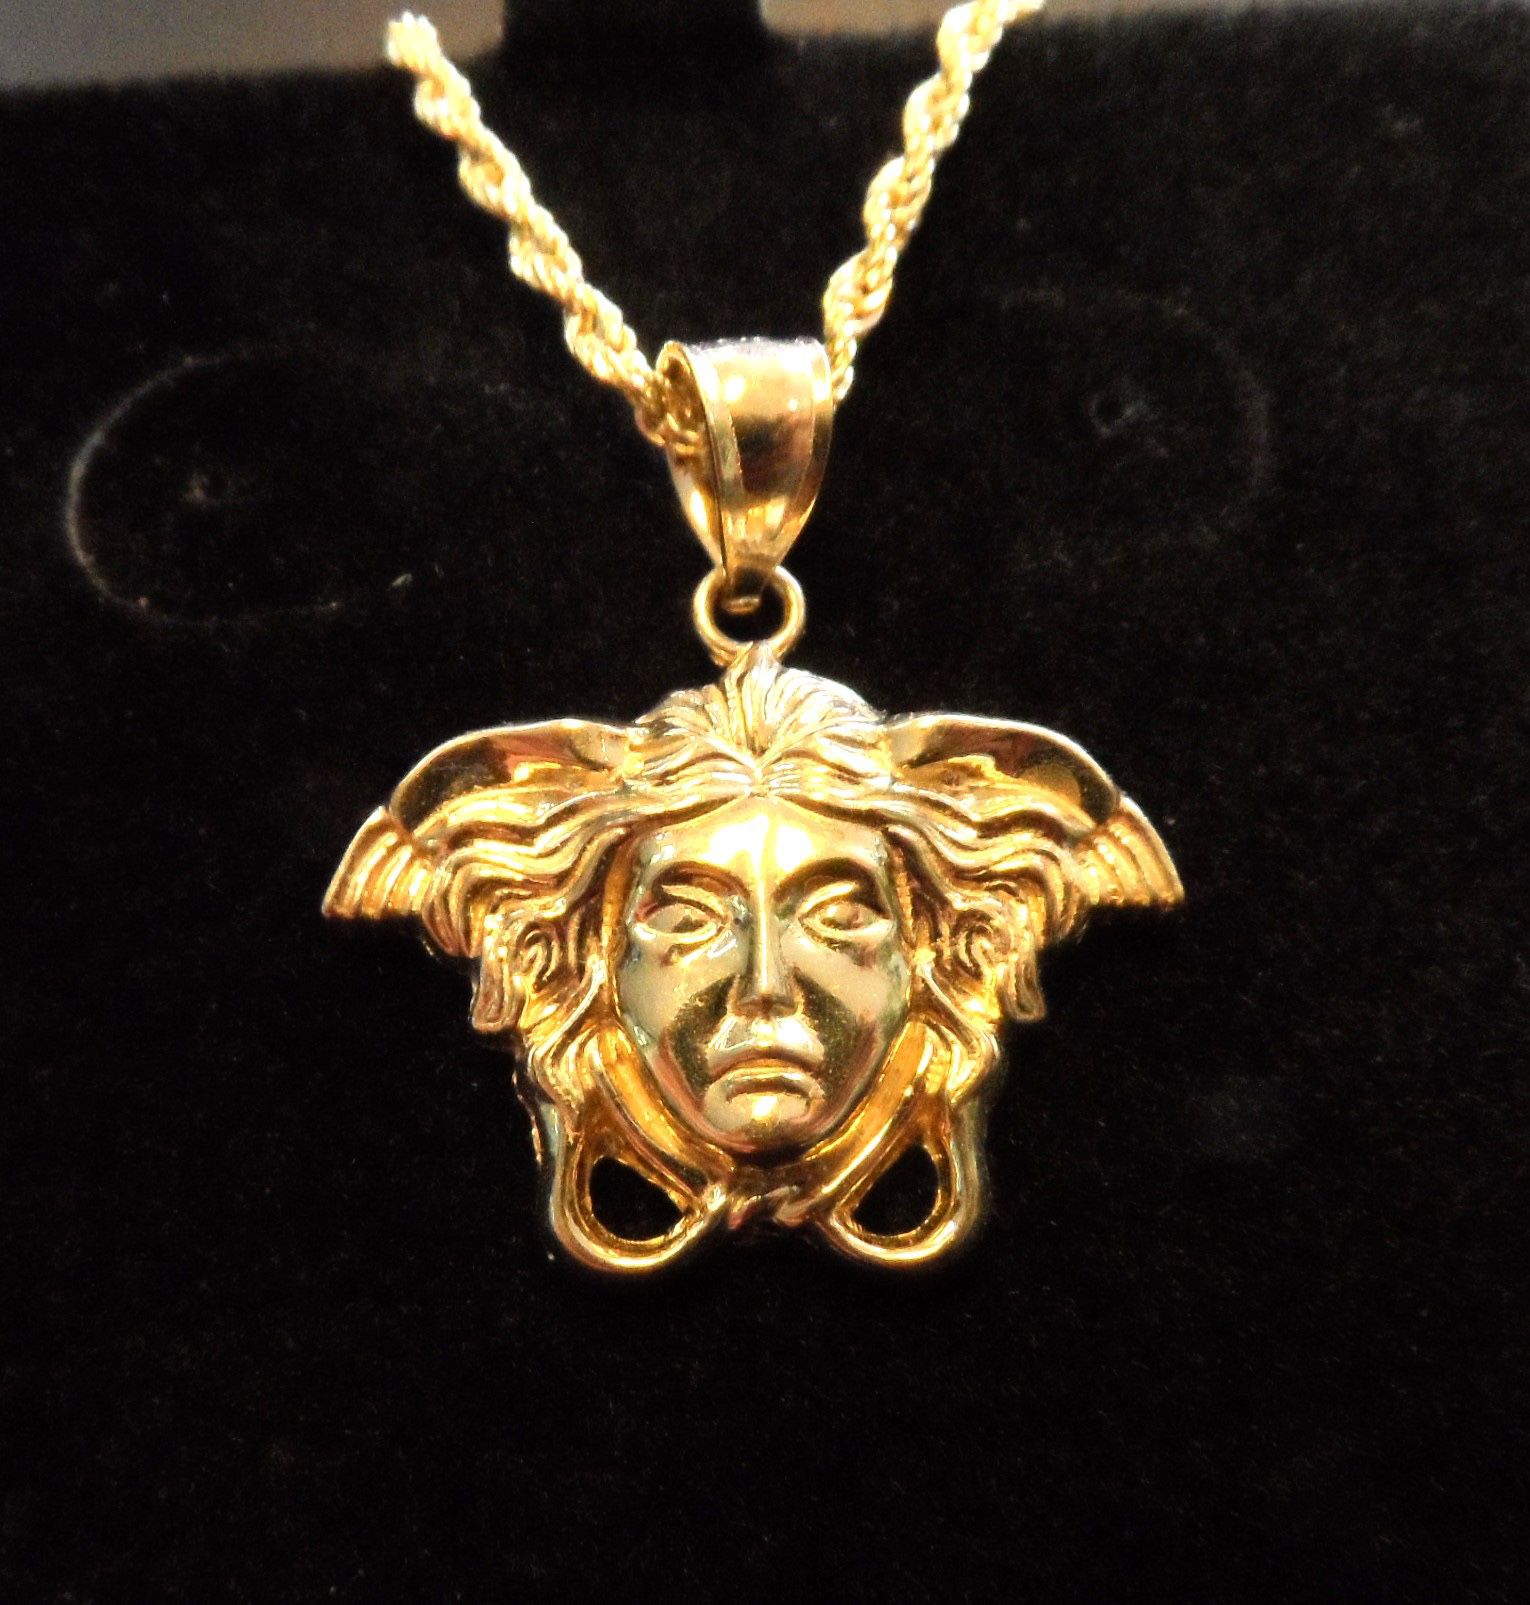 NEW 10K GOLD MEDUSA PENDANT  WITH CHAIN